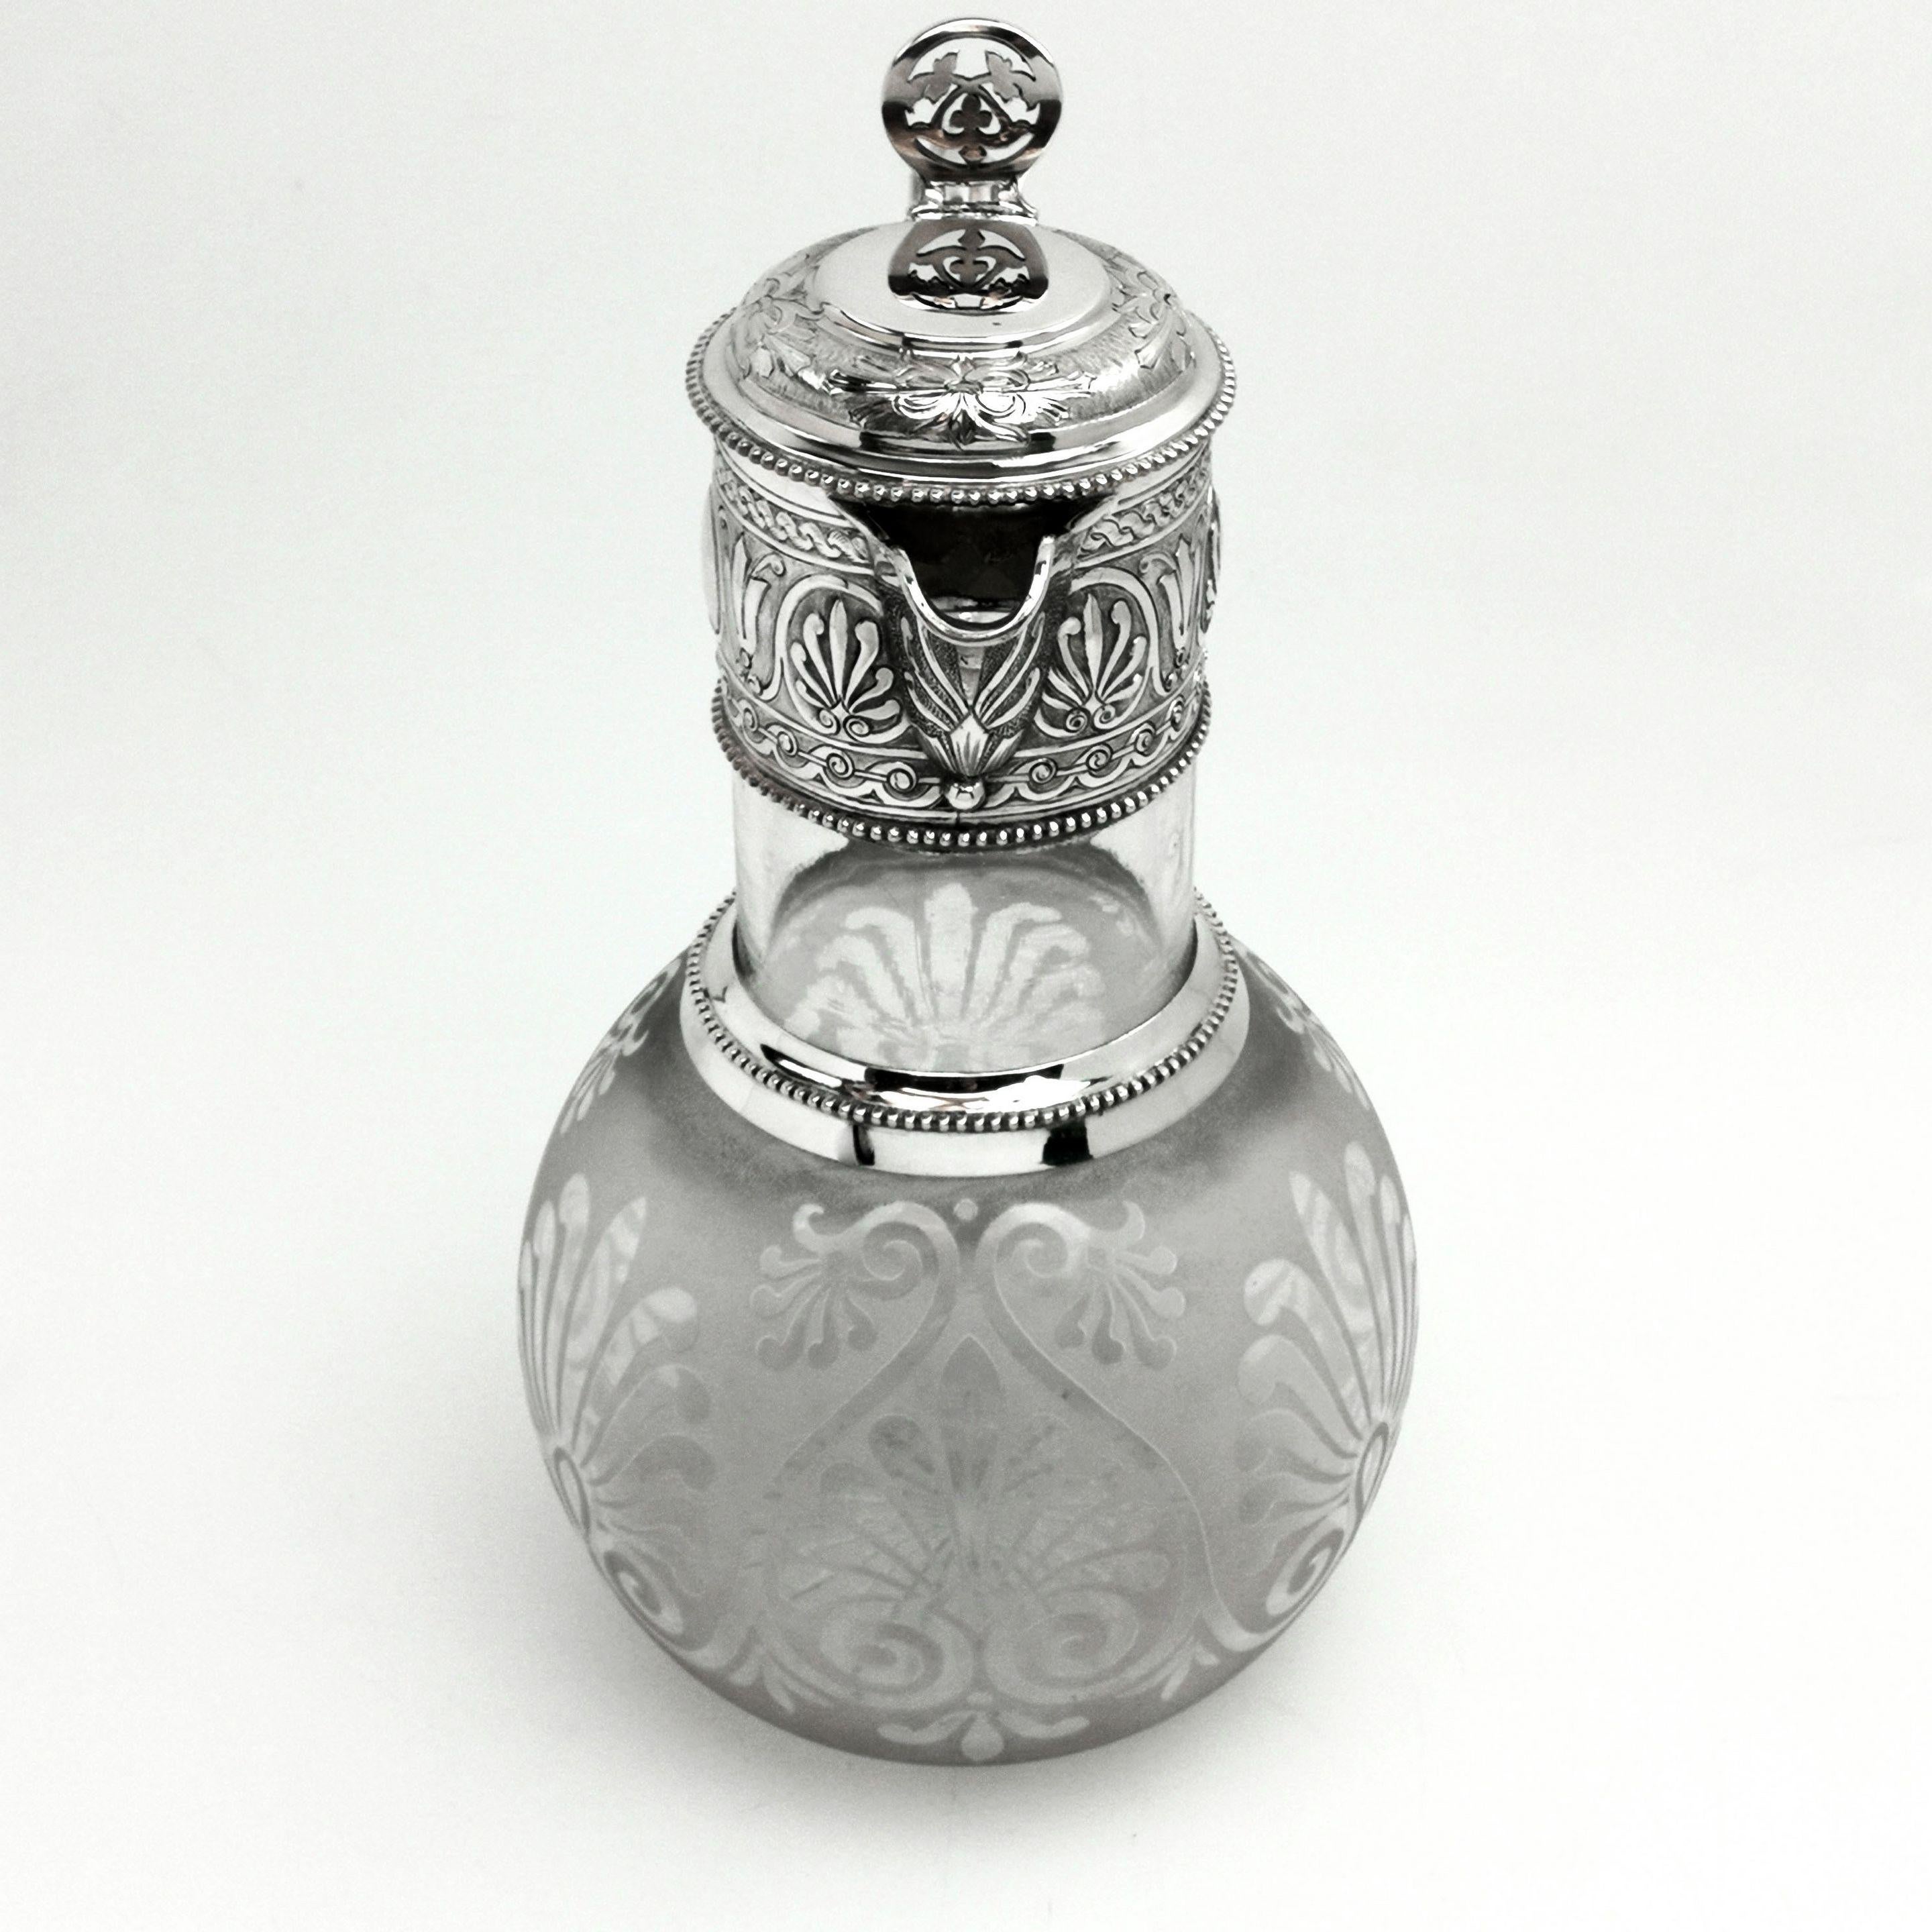 An elegant Antique Victorian solid Silver mounted Claret Jug. The round body of the Jug has a decorative pattern on the glass with a frosted glass background. The silver neck and hinged lid both feature lovely chased decorative patterning. The Jug